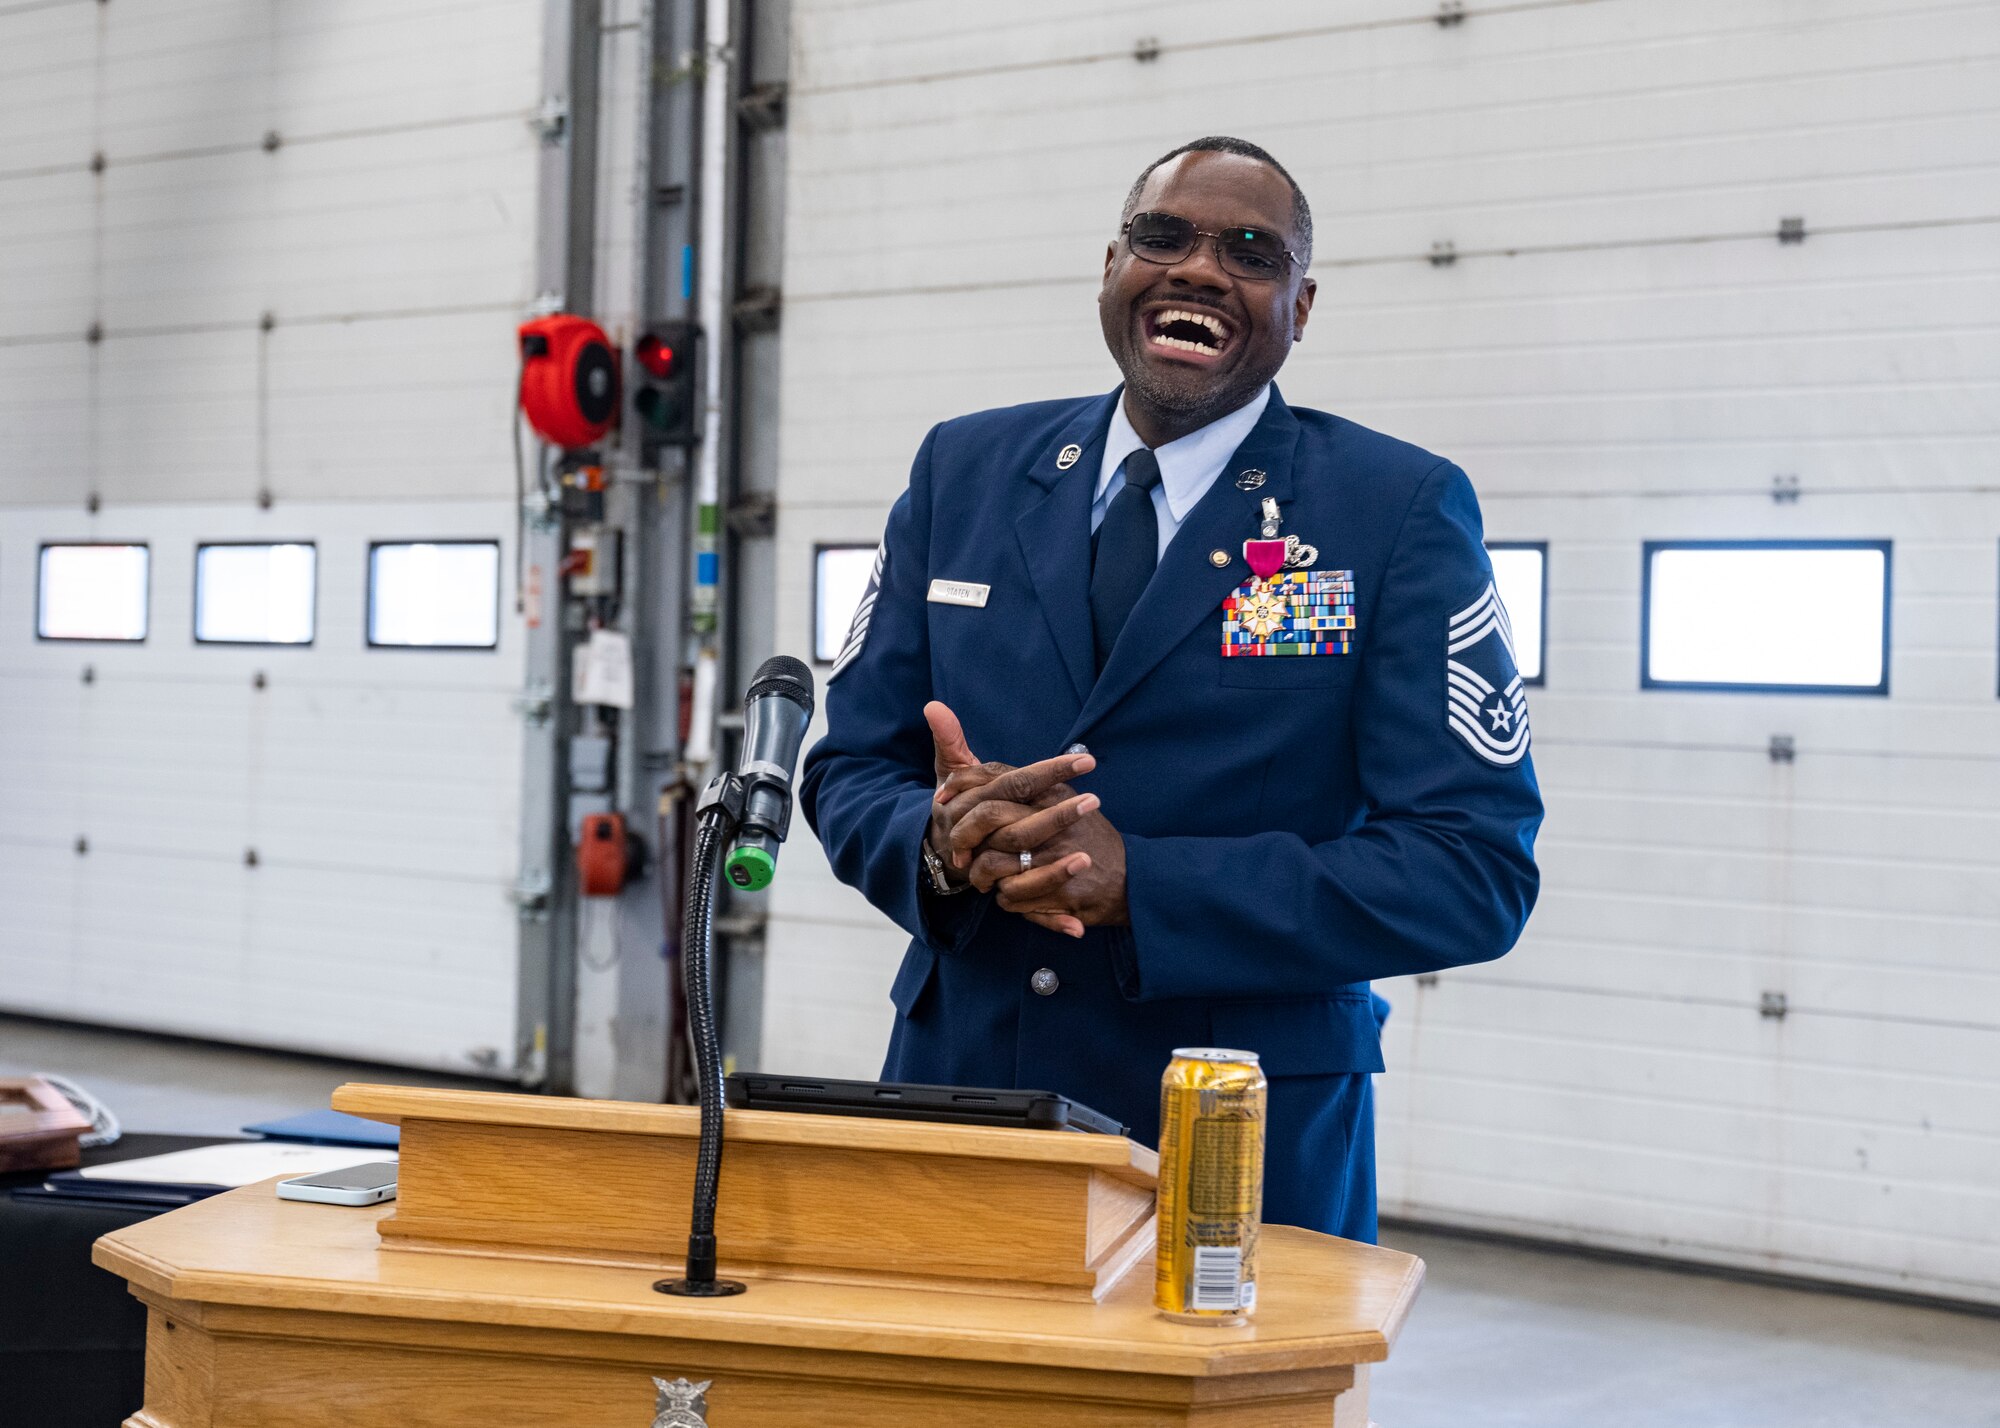 A retirement ceremony was held for Staten for his 30 years of dedicated service to the U.S. Air Force.